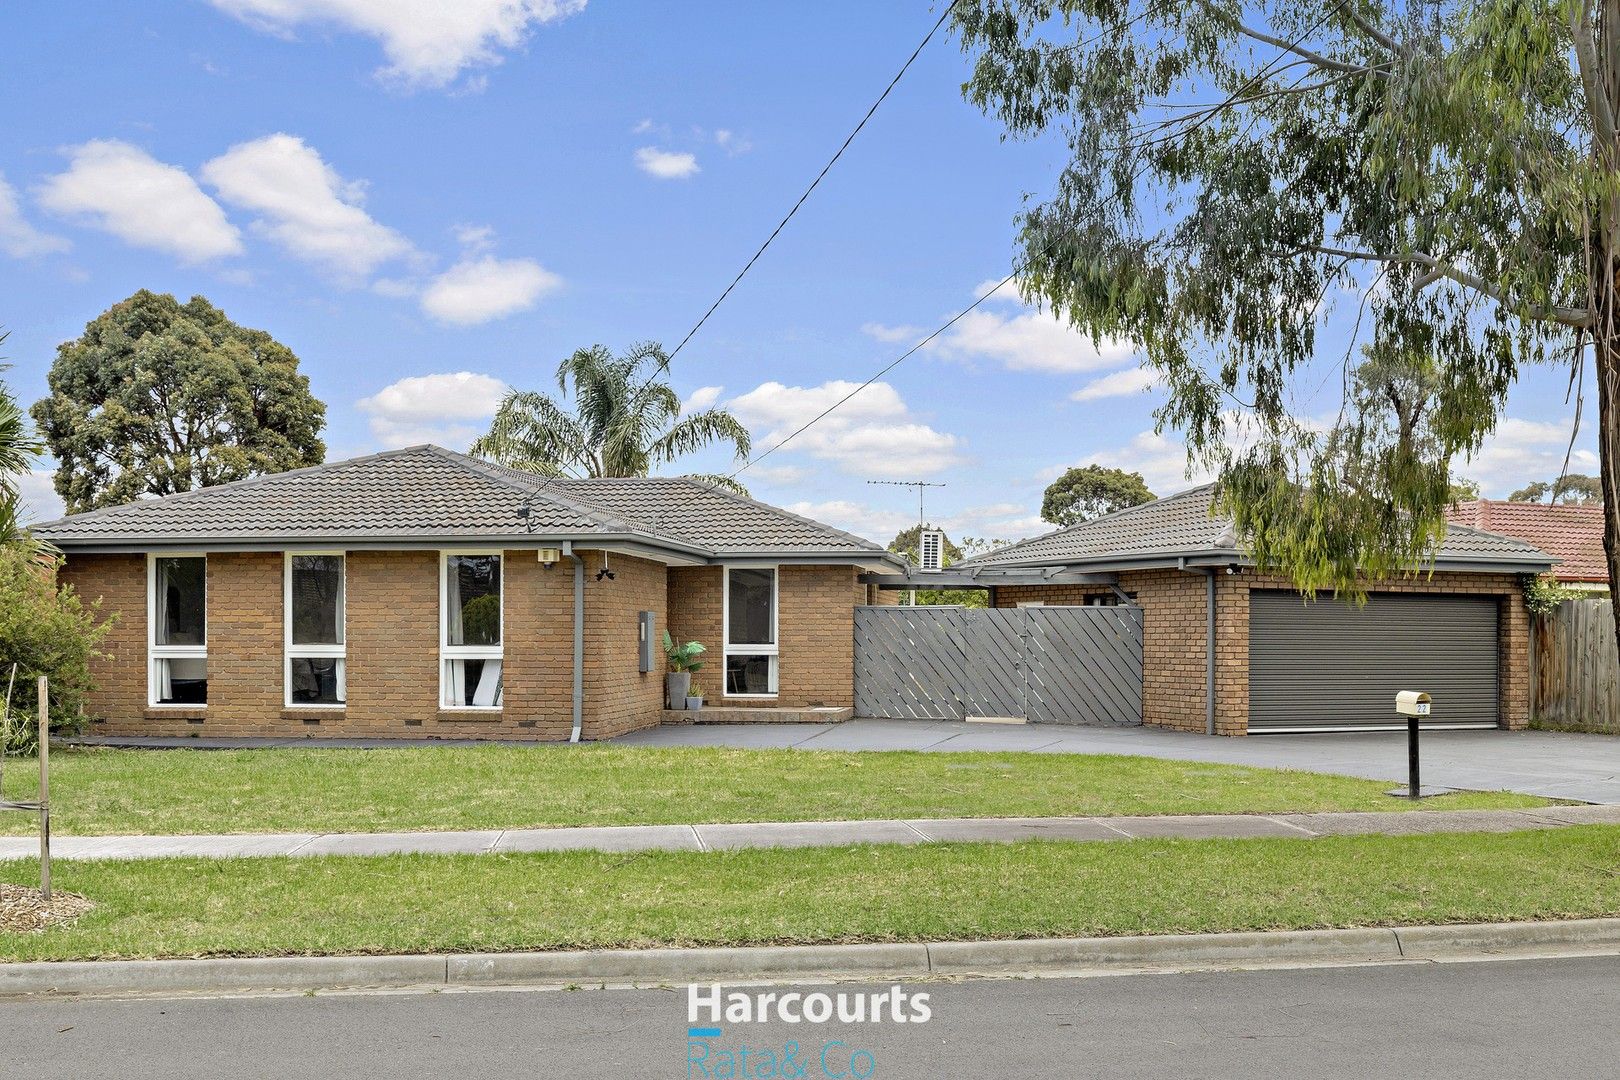 3 bedrooms House in 22 Maywood Drive EPPING VIC, 3076